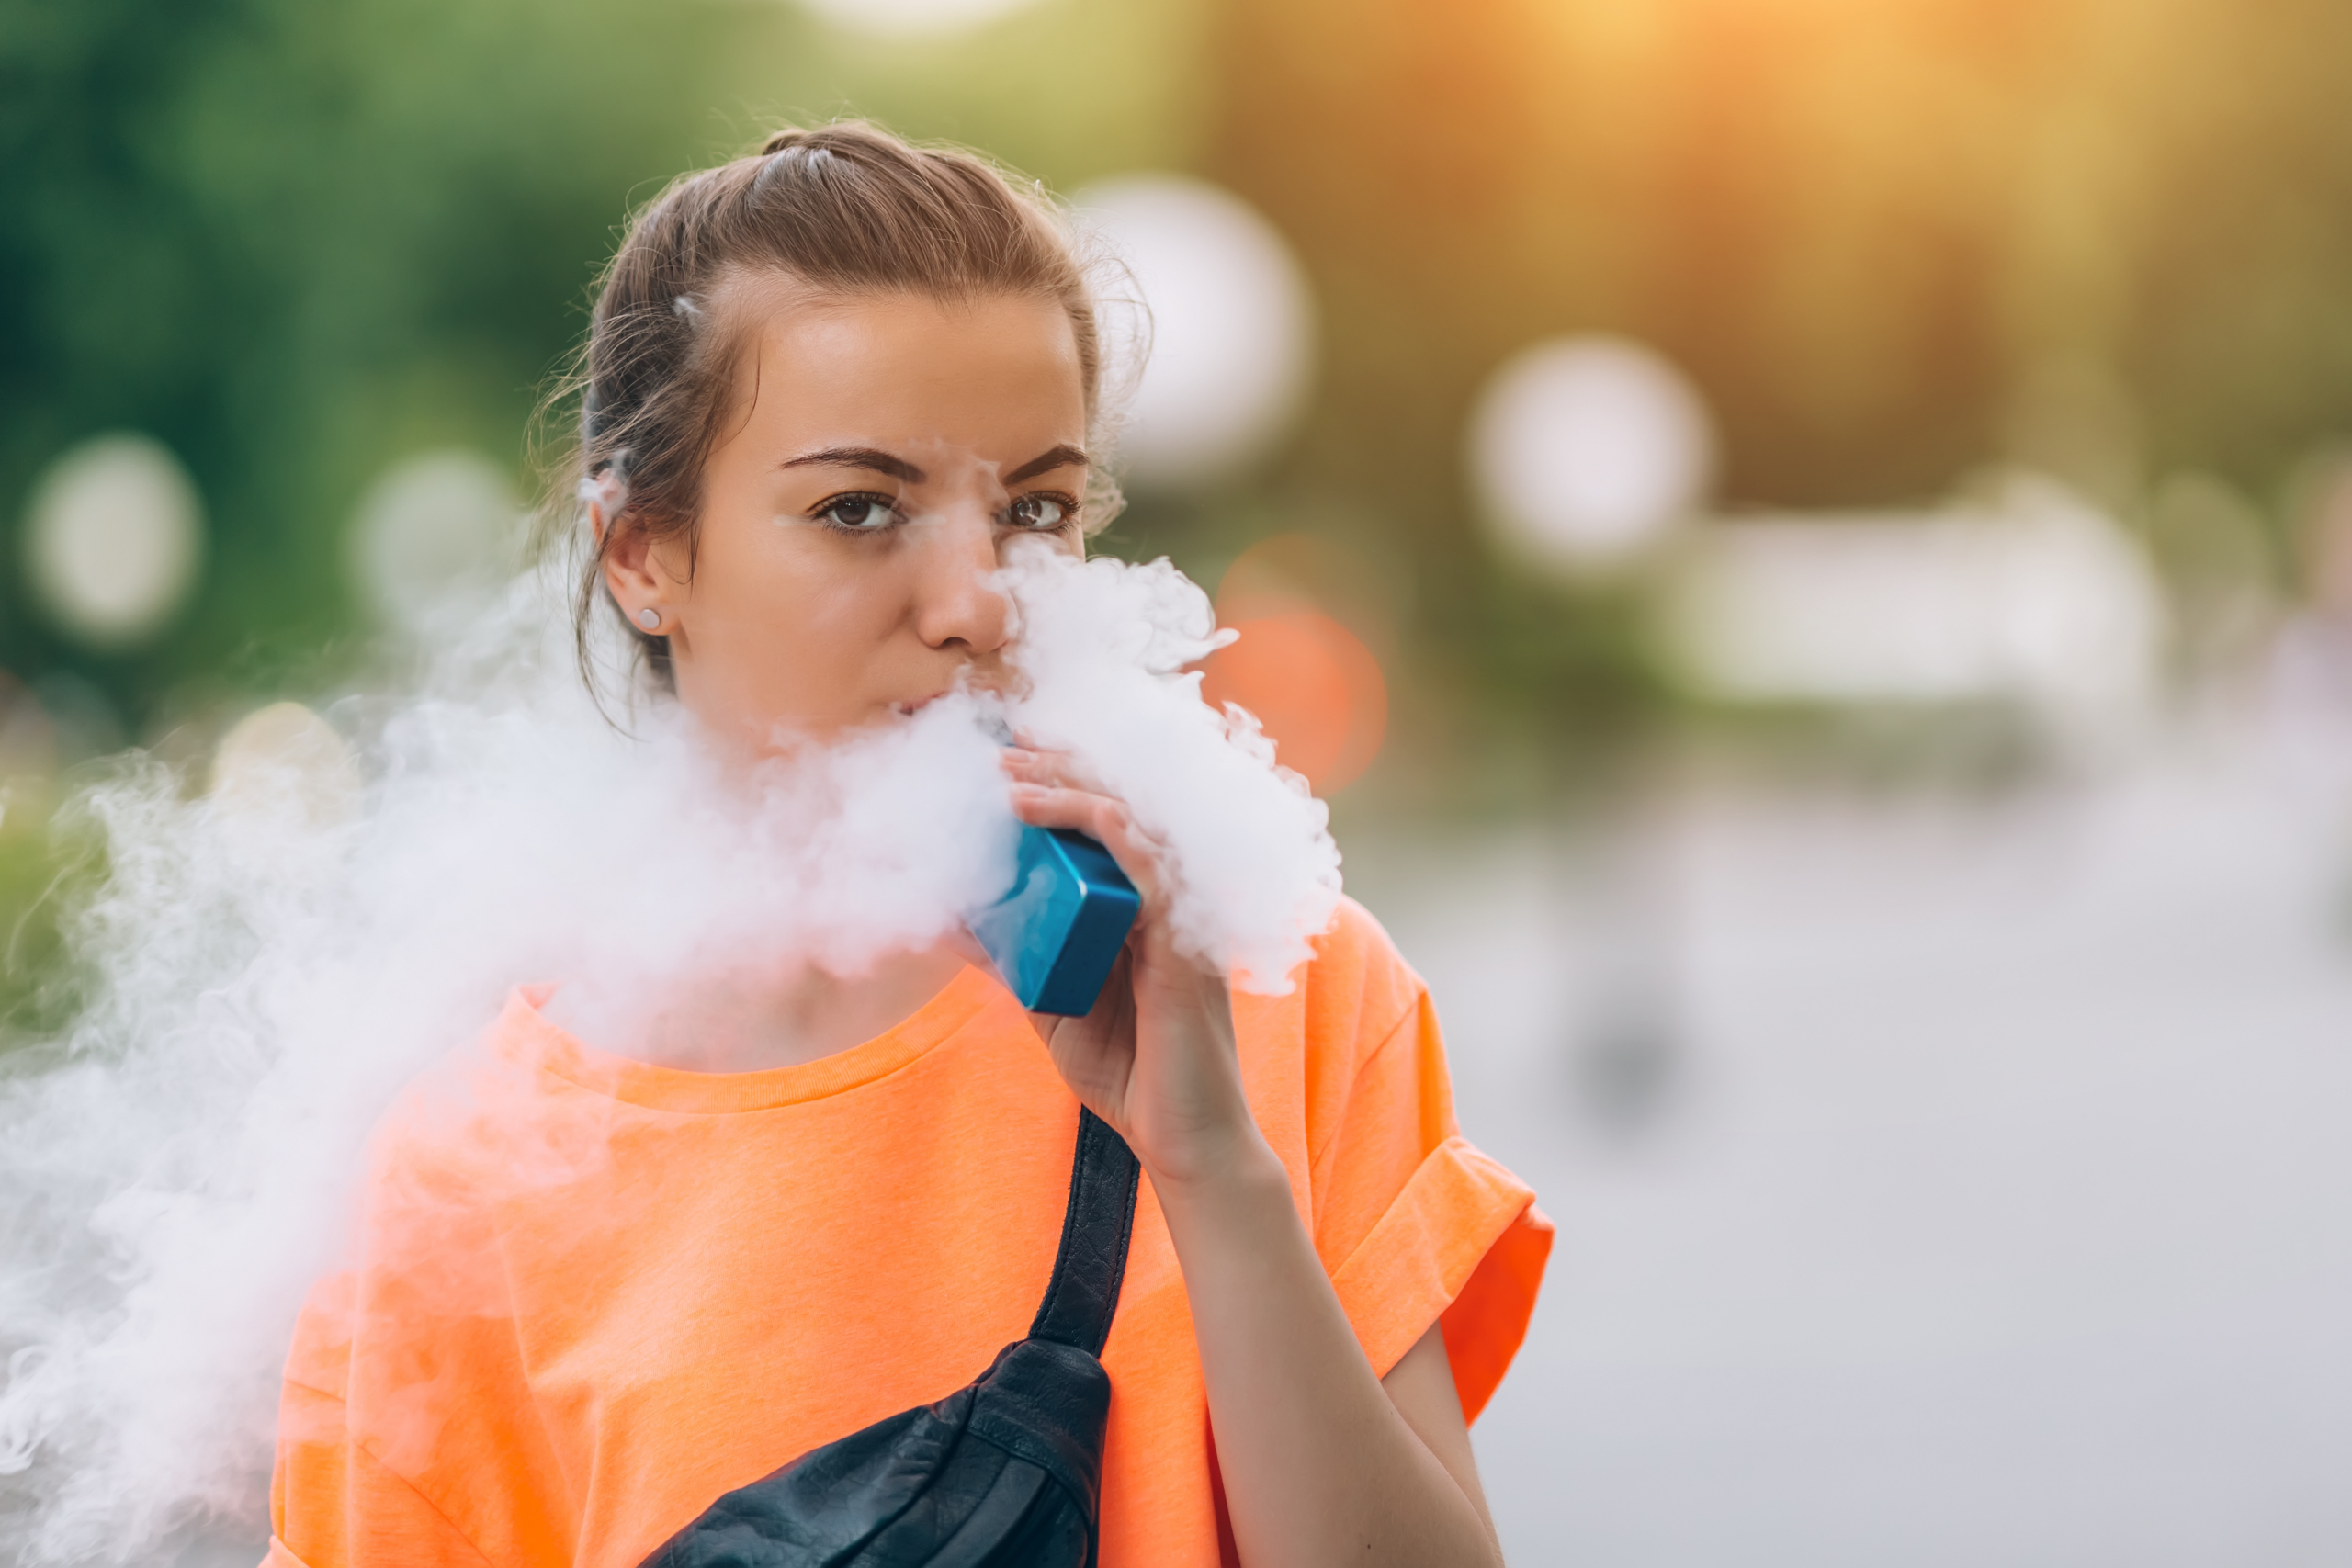 Vaping for Health: The Potential Benefits and Risks